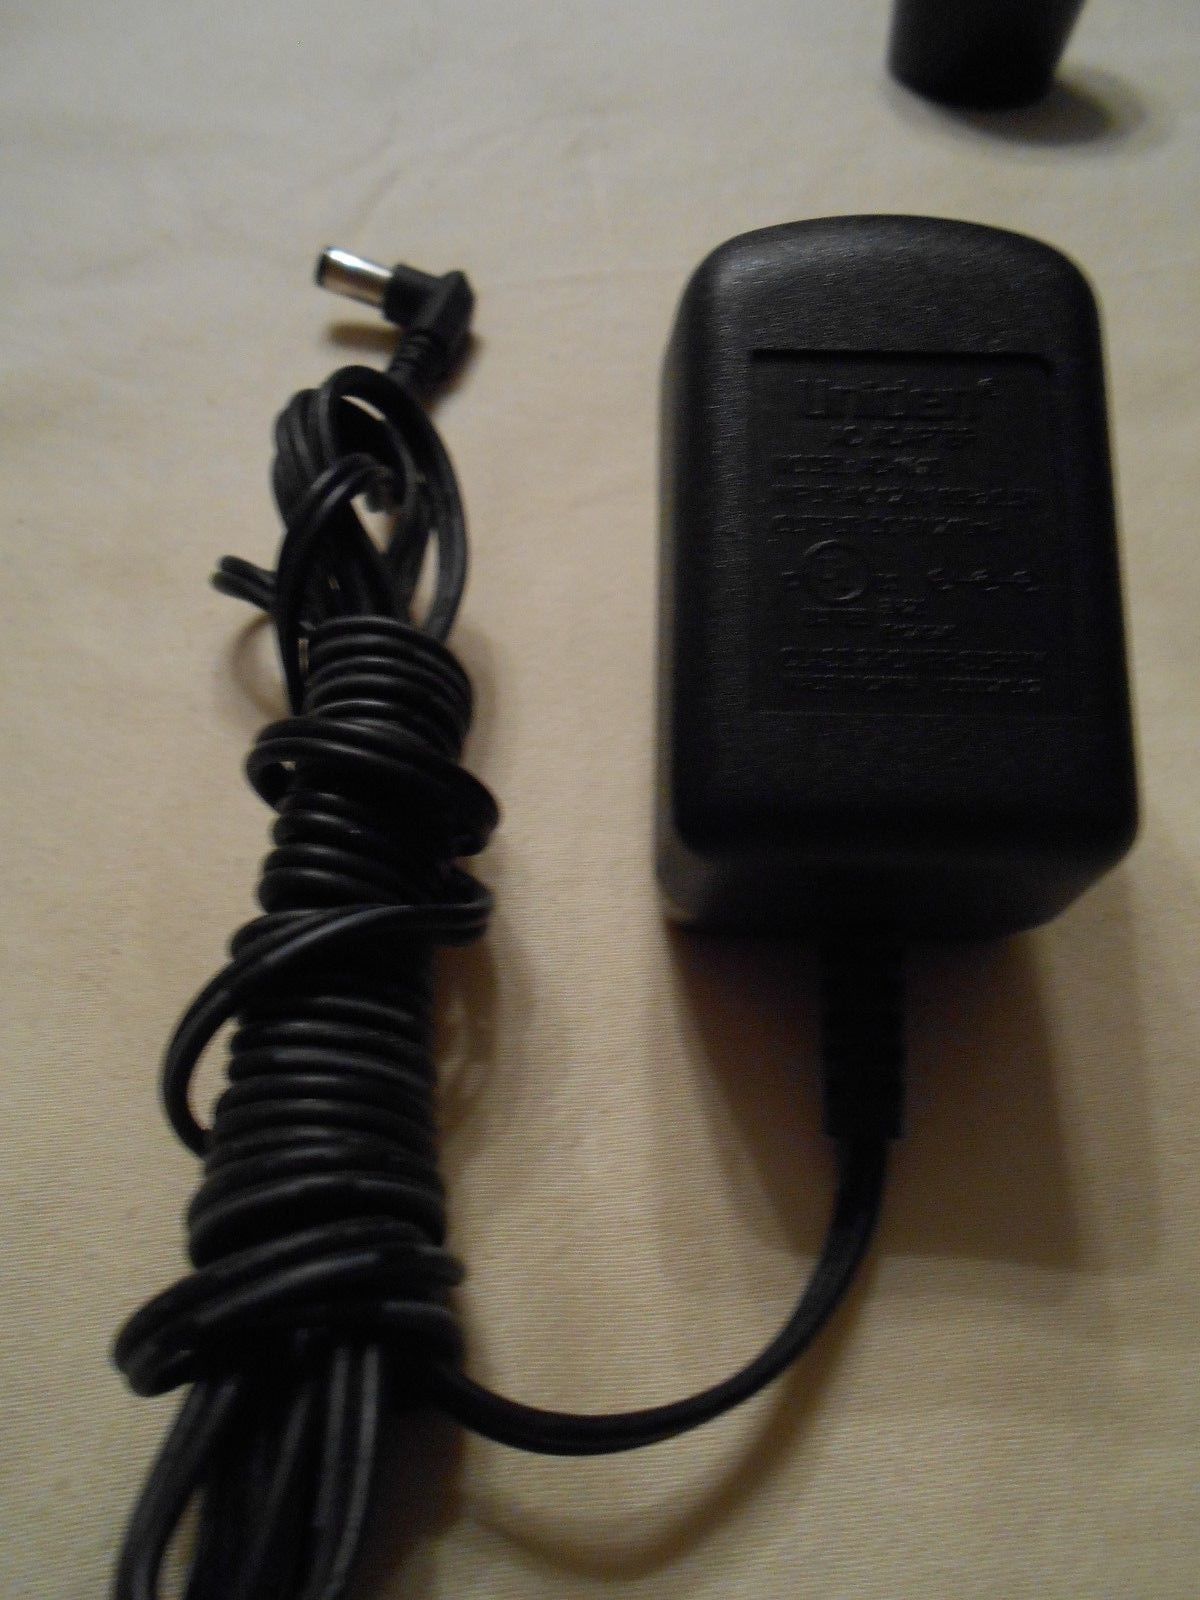 New Uniden AD-1010 U090021D12 9v 210mA AC Adapter For TCX800 TCX905 TCX930 DECT 6.0 Handset Chargers